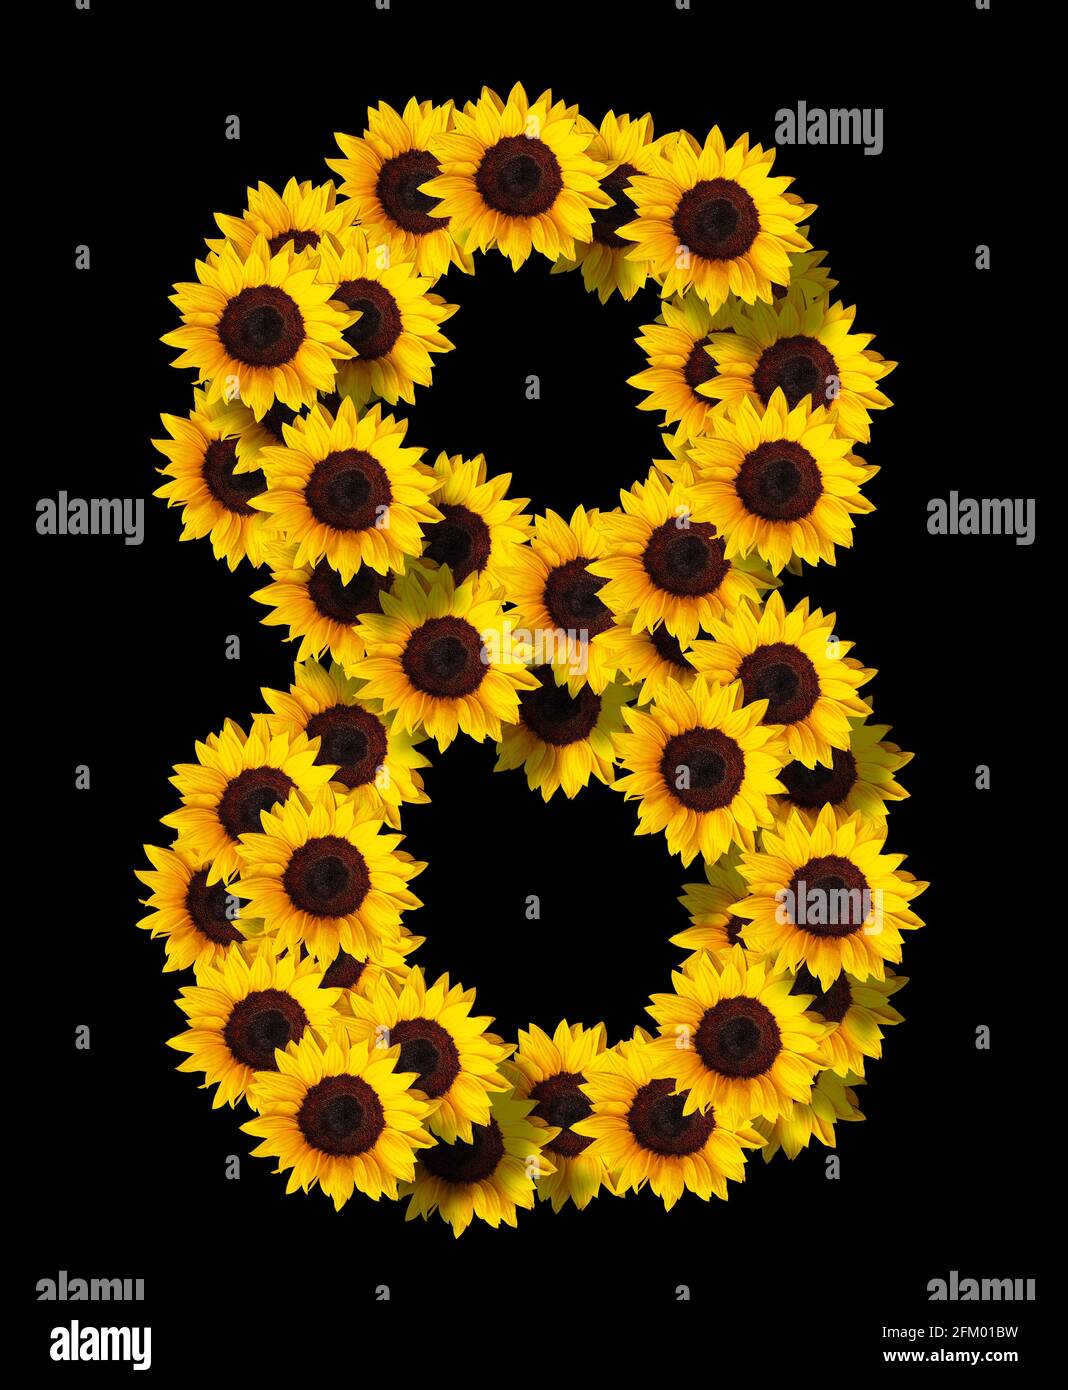 image of number 8 made of yellow sunflowers flowers isolated on black background. Design element for love concepts designs. Ideal for mothers day and Stock Photo